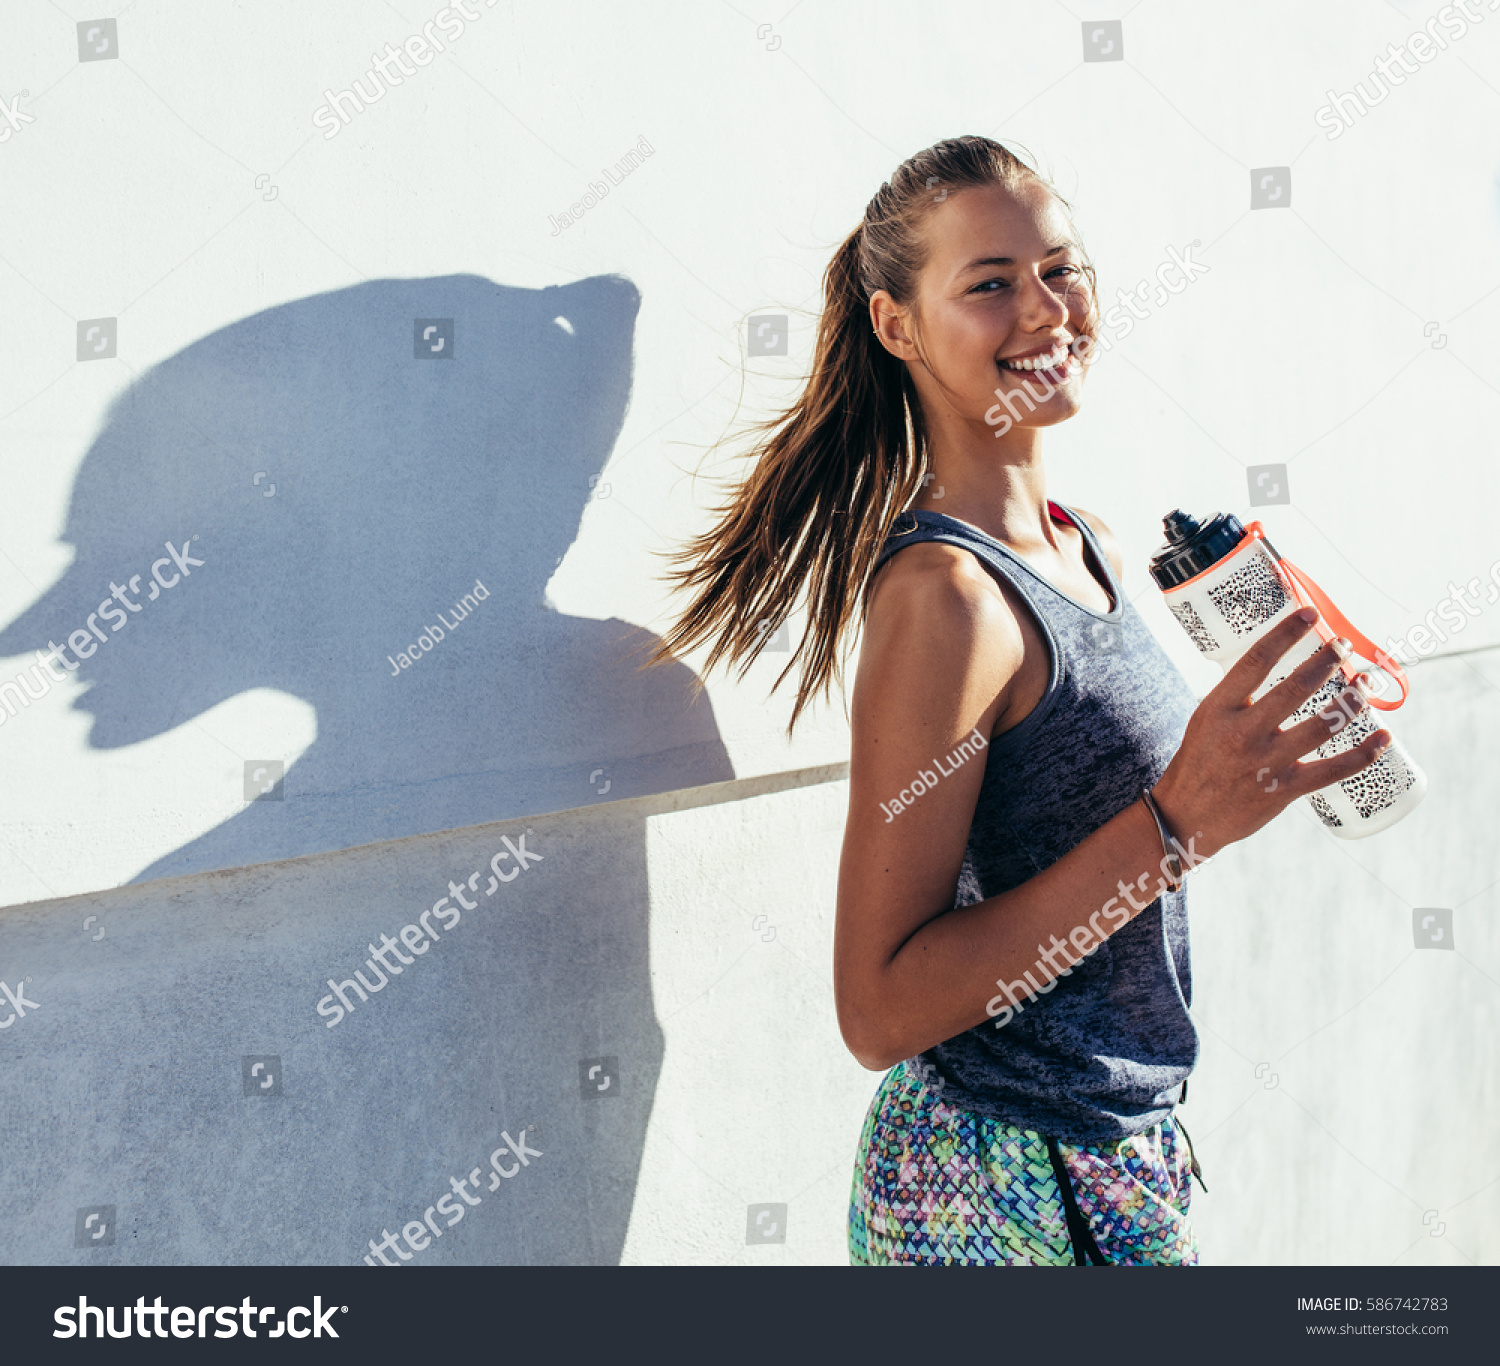 Shot of beautiful female runner standing outdoors holding water bottle. Fitness woman taking a break after running workout. #586742783